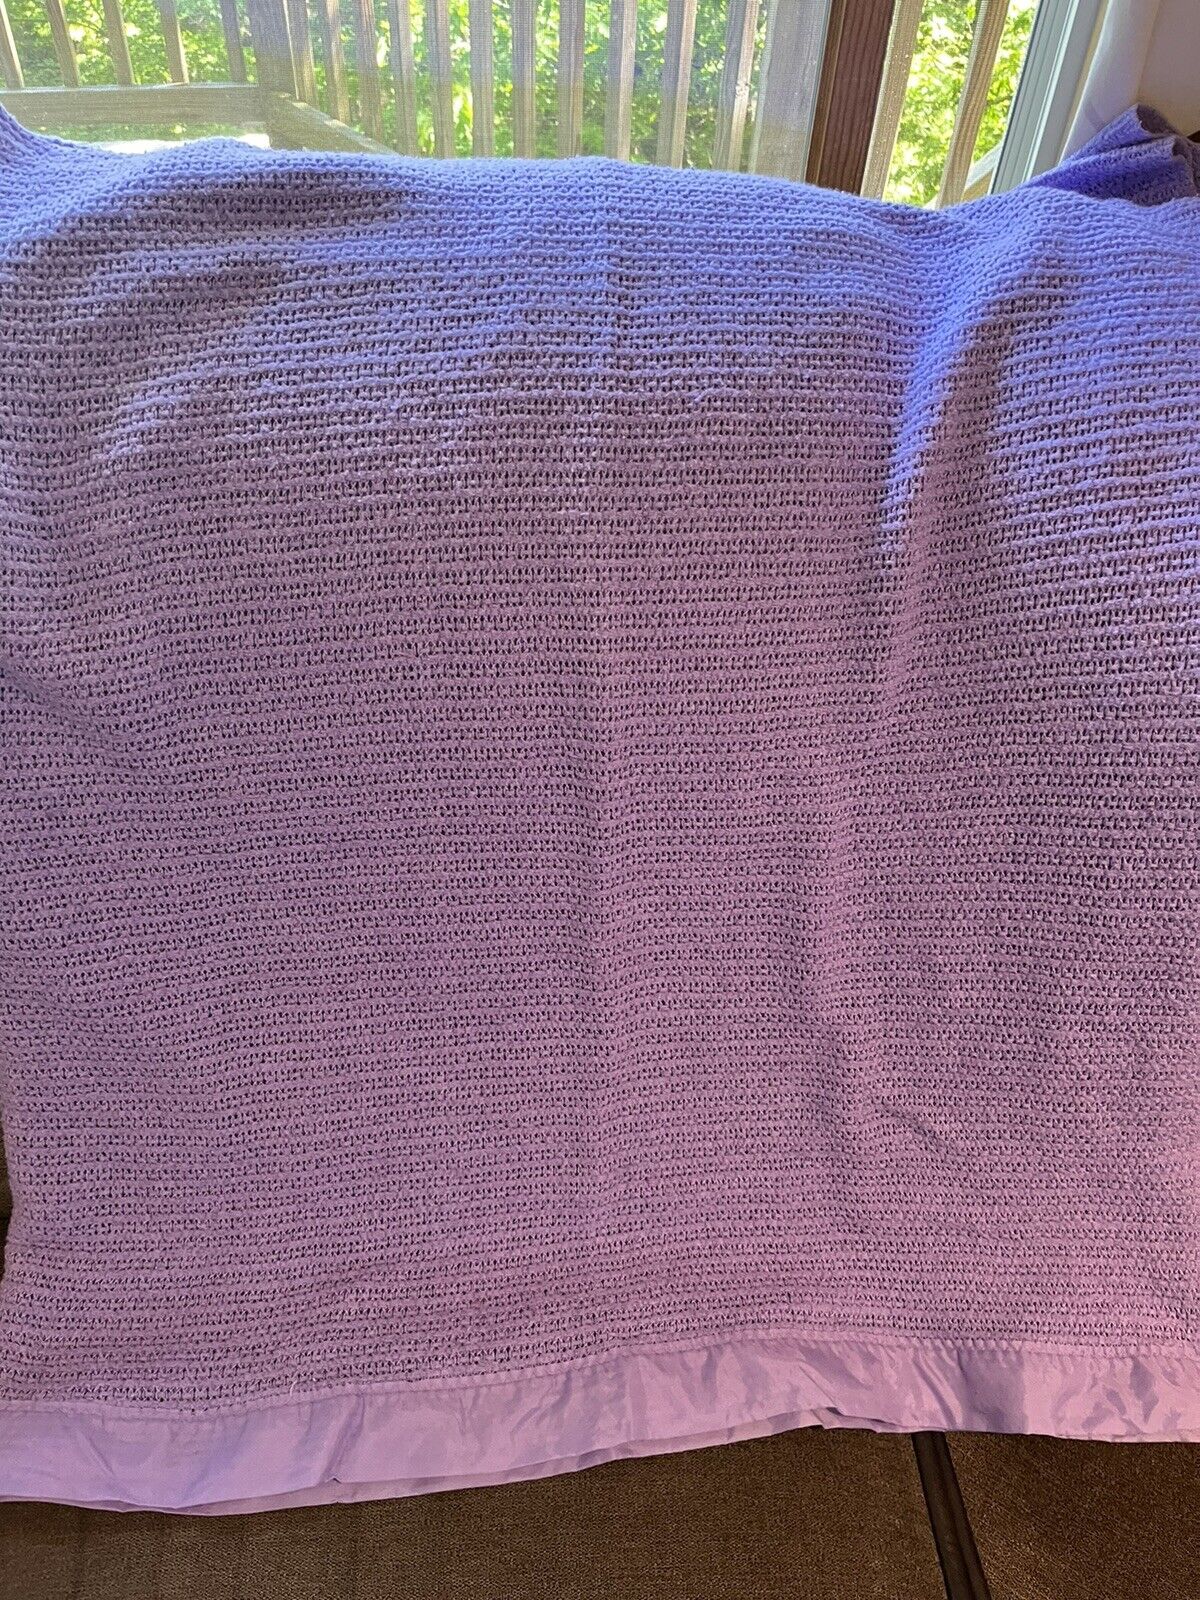 Vintage Chatham Waffle Weave Lilac Blanket Sateen Trim 60 x 80 in.